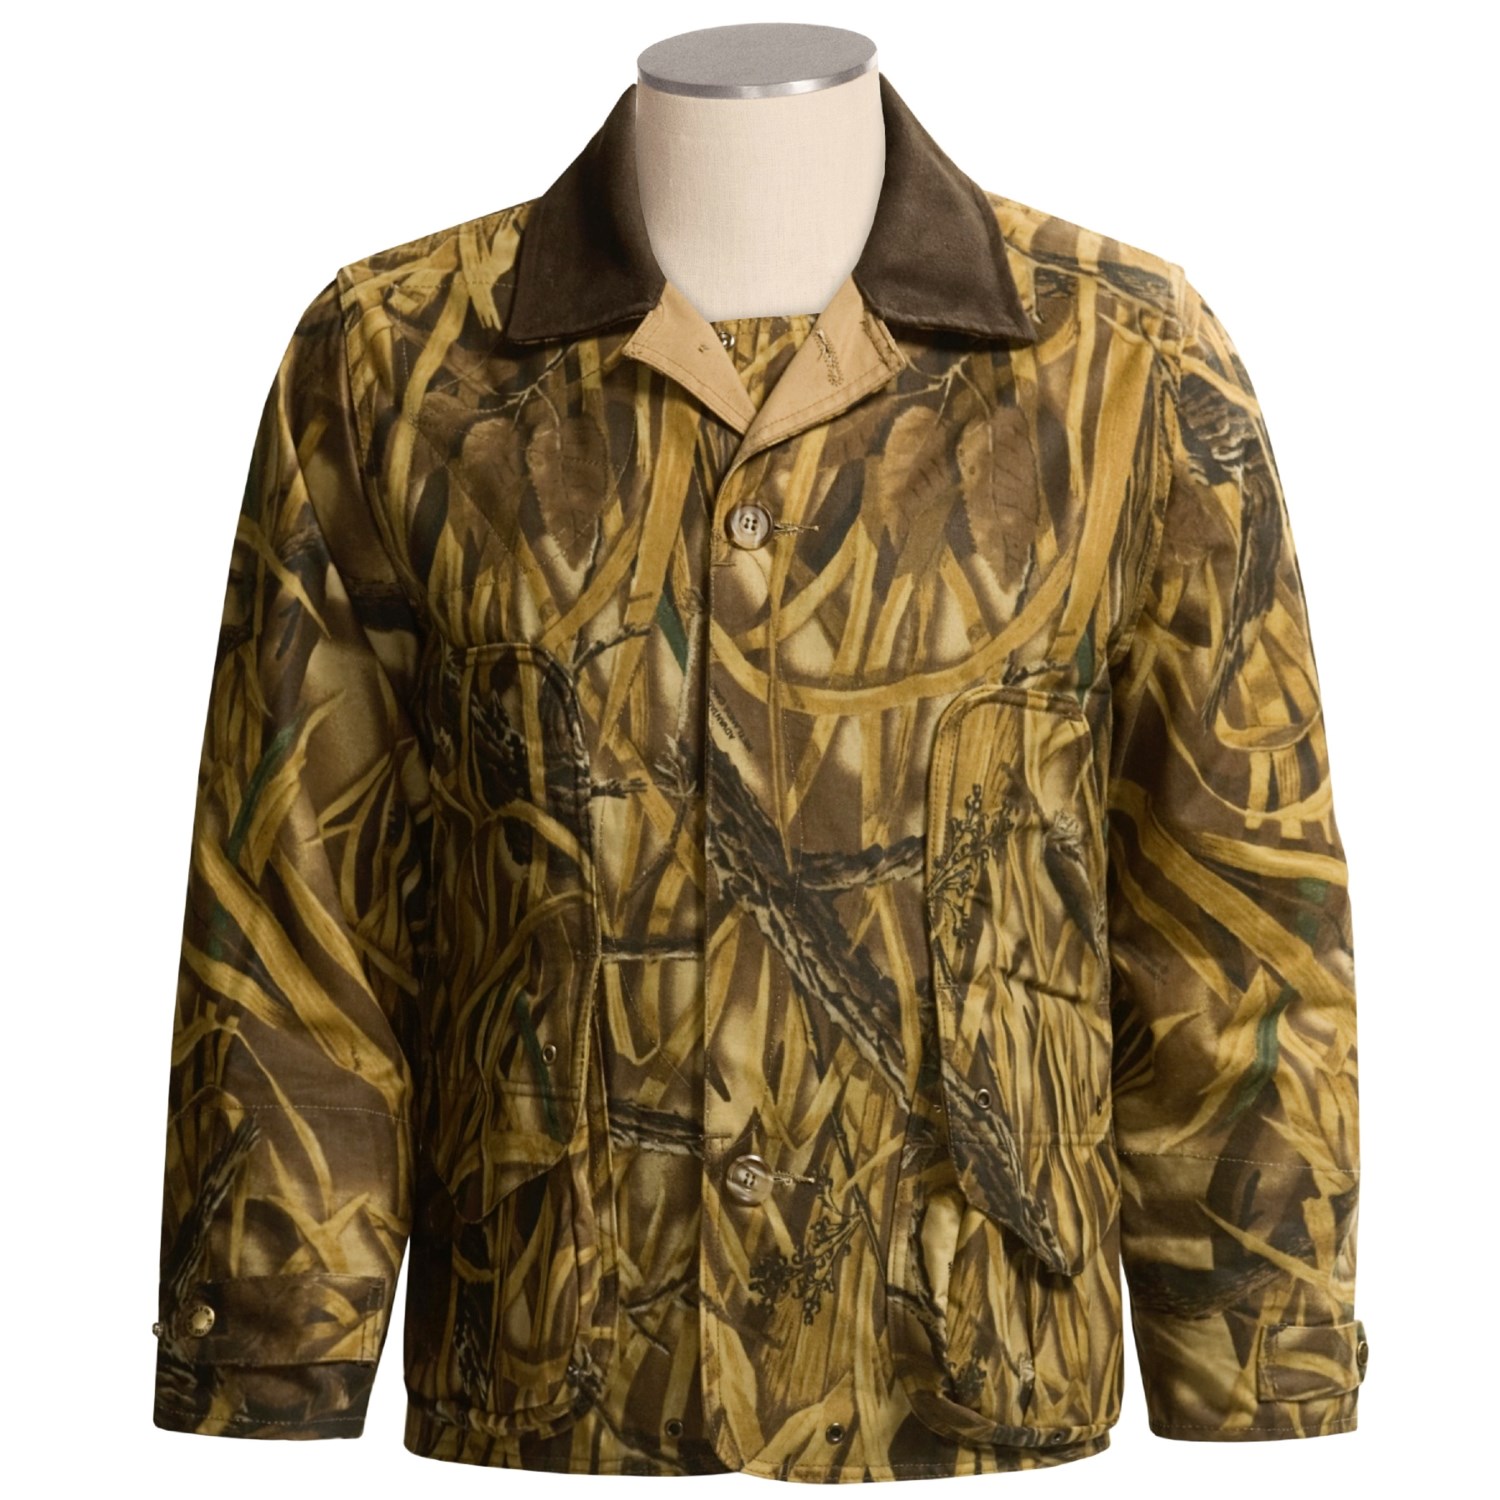 C.C. Filson Waxed Cotton Hunting Coat (For Men) 1149C - Save 37%